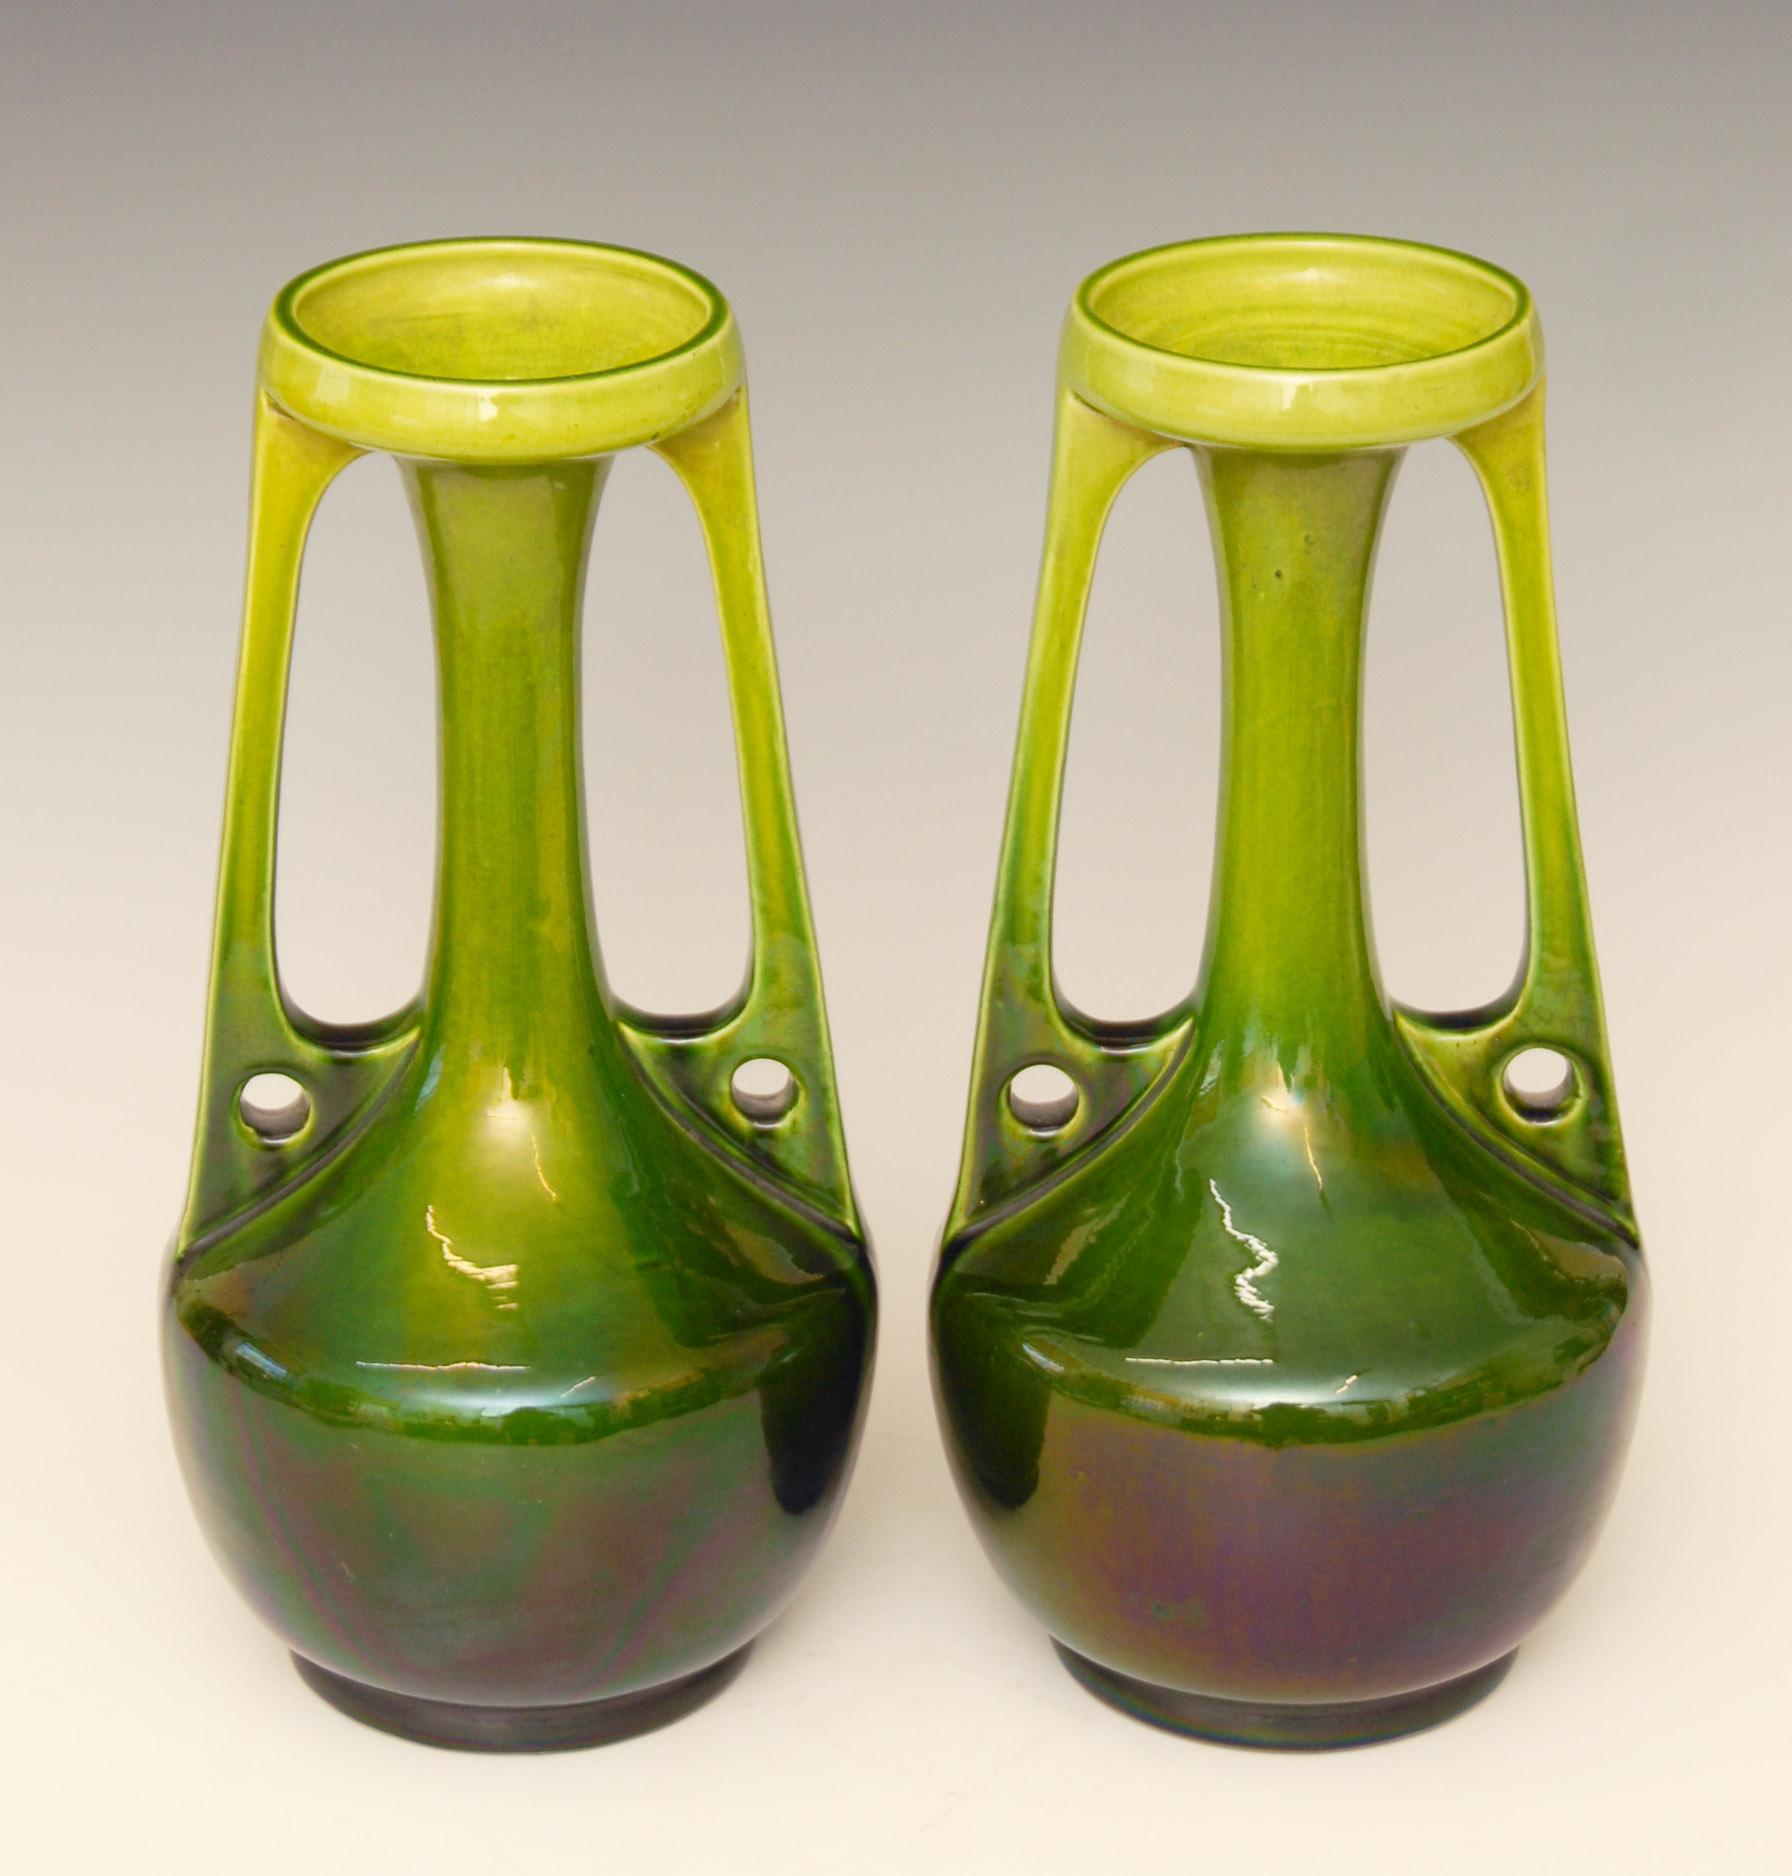 Eye-catching large pair of Art Nouveau vases by Bretby of England, circa 1910.

Inscribed Bretby 1565 E England.

Price includes free shipping to anywhere in the world.